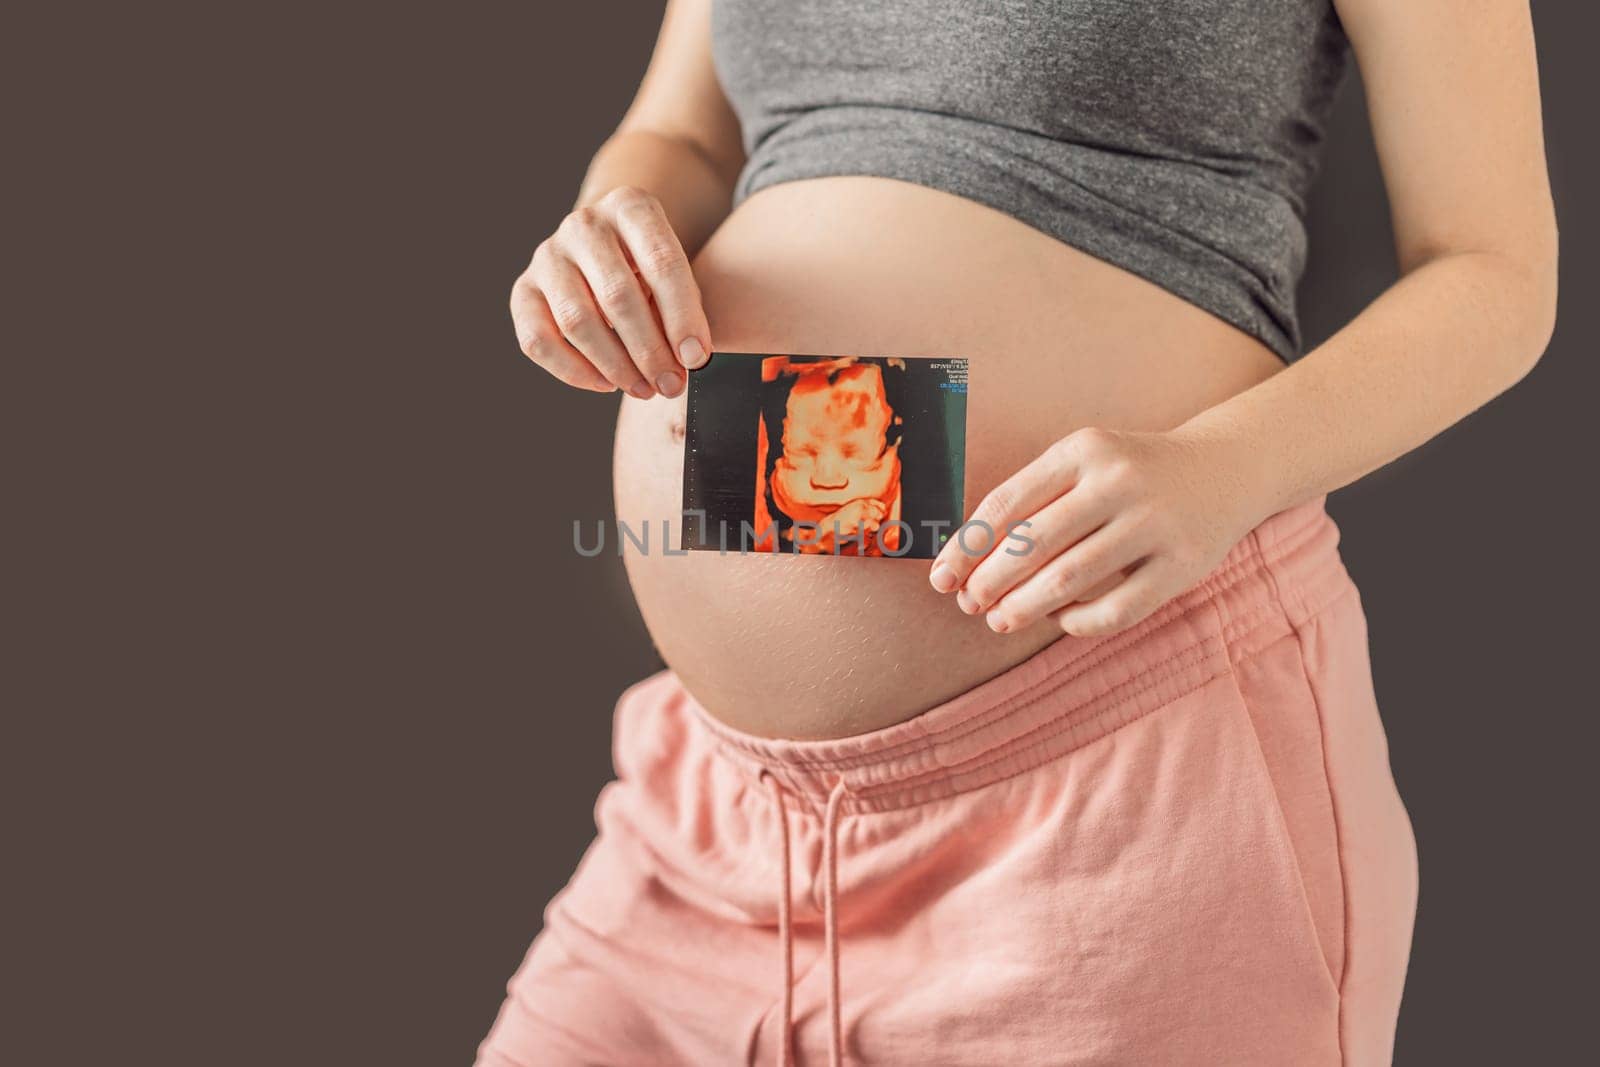 Expectant mother tenderly connects with her unborn child, holding ultrasound photo to her pregnant belly by galitskaya